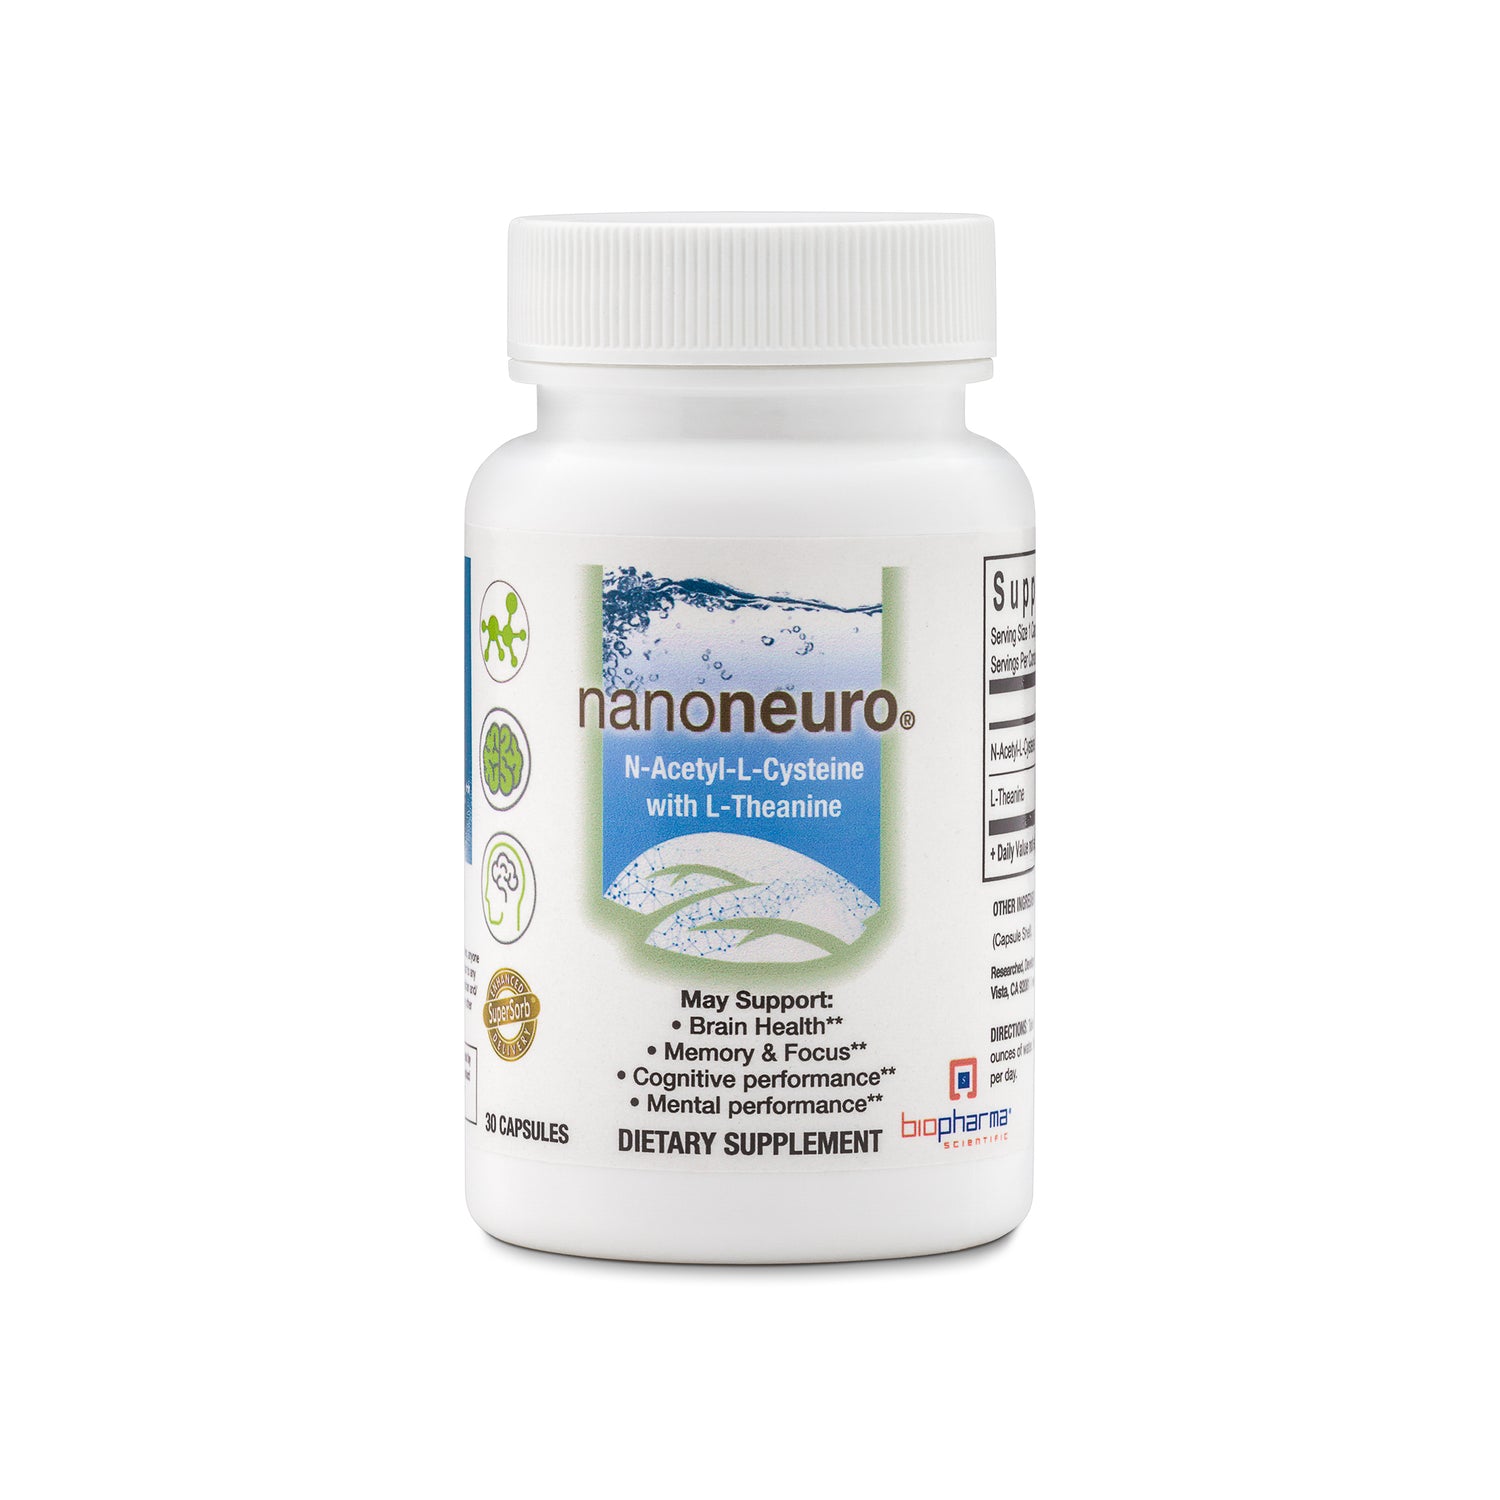 nanoneuro memory brain support n-acetyl-l-cysteine NAC l-theanine supplement capsule - front side